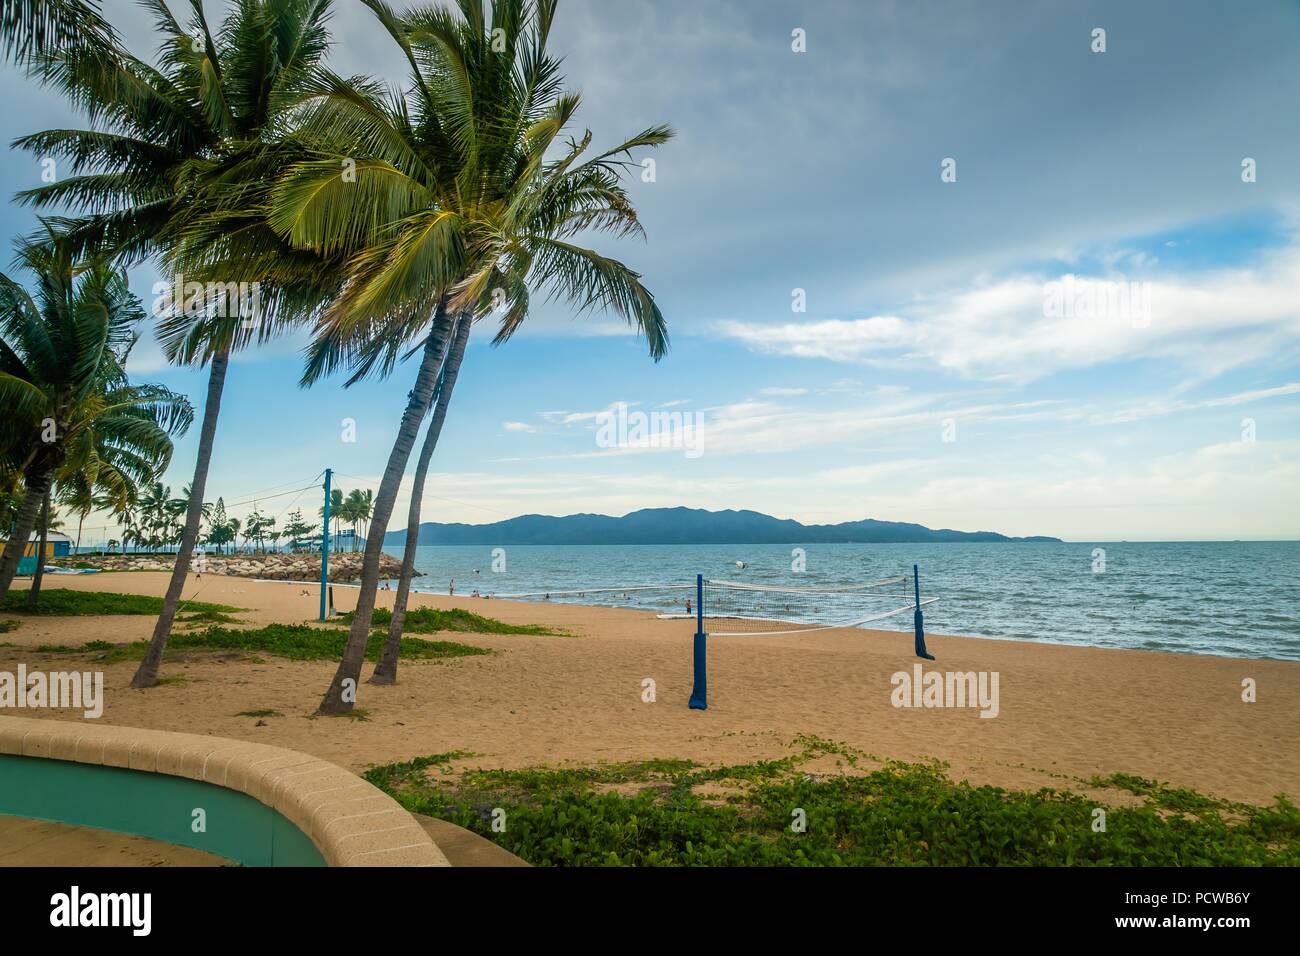 Volleyball field on the beach with coconut trees in Townsville, Australia Stock Photo